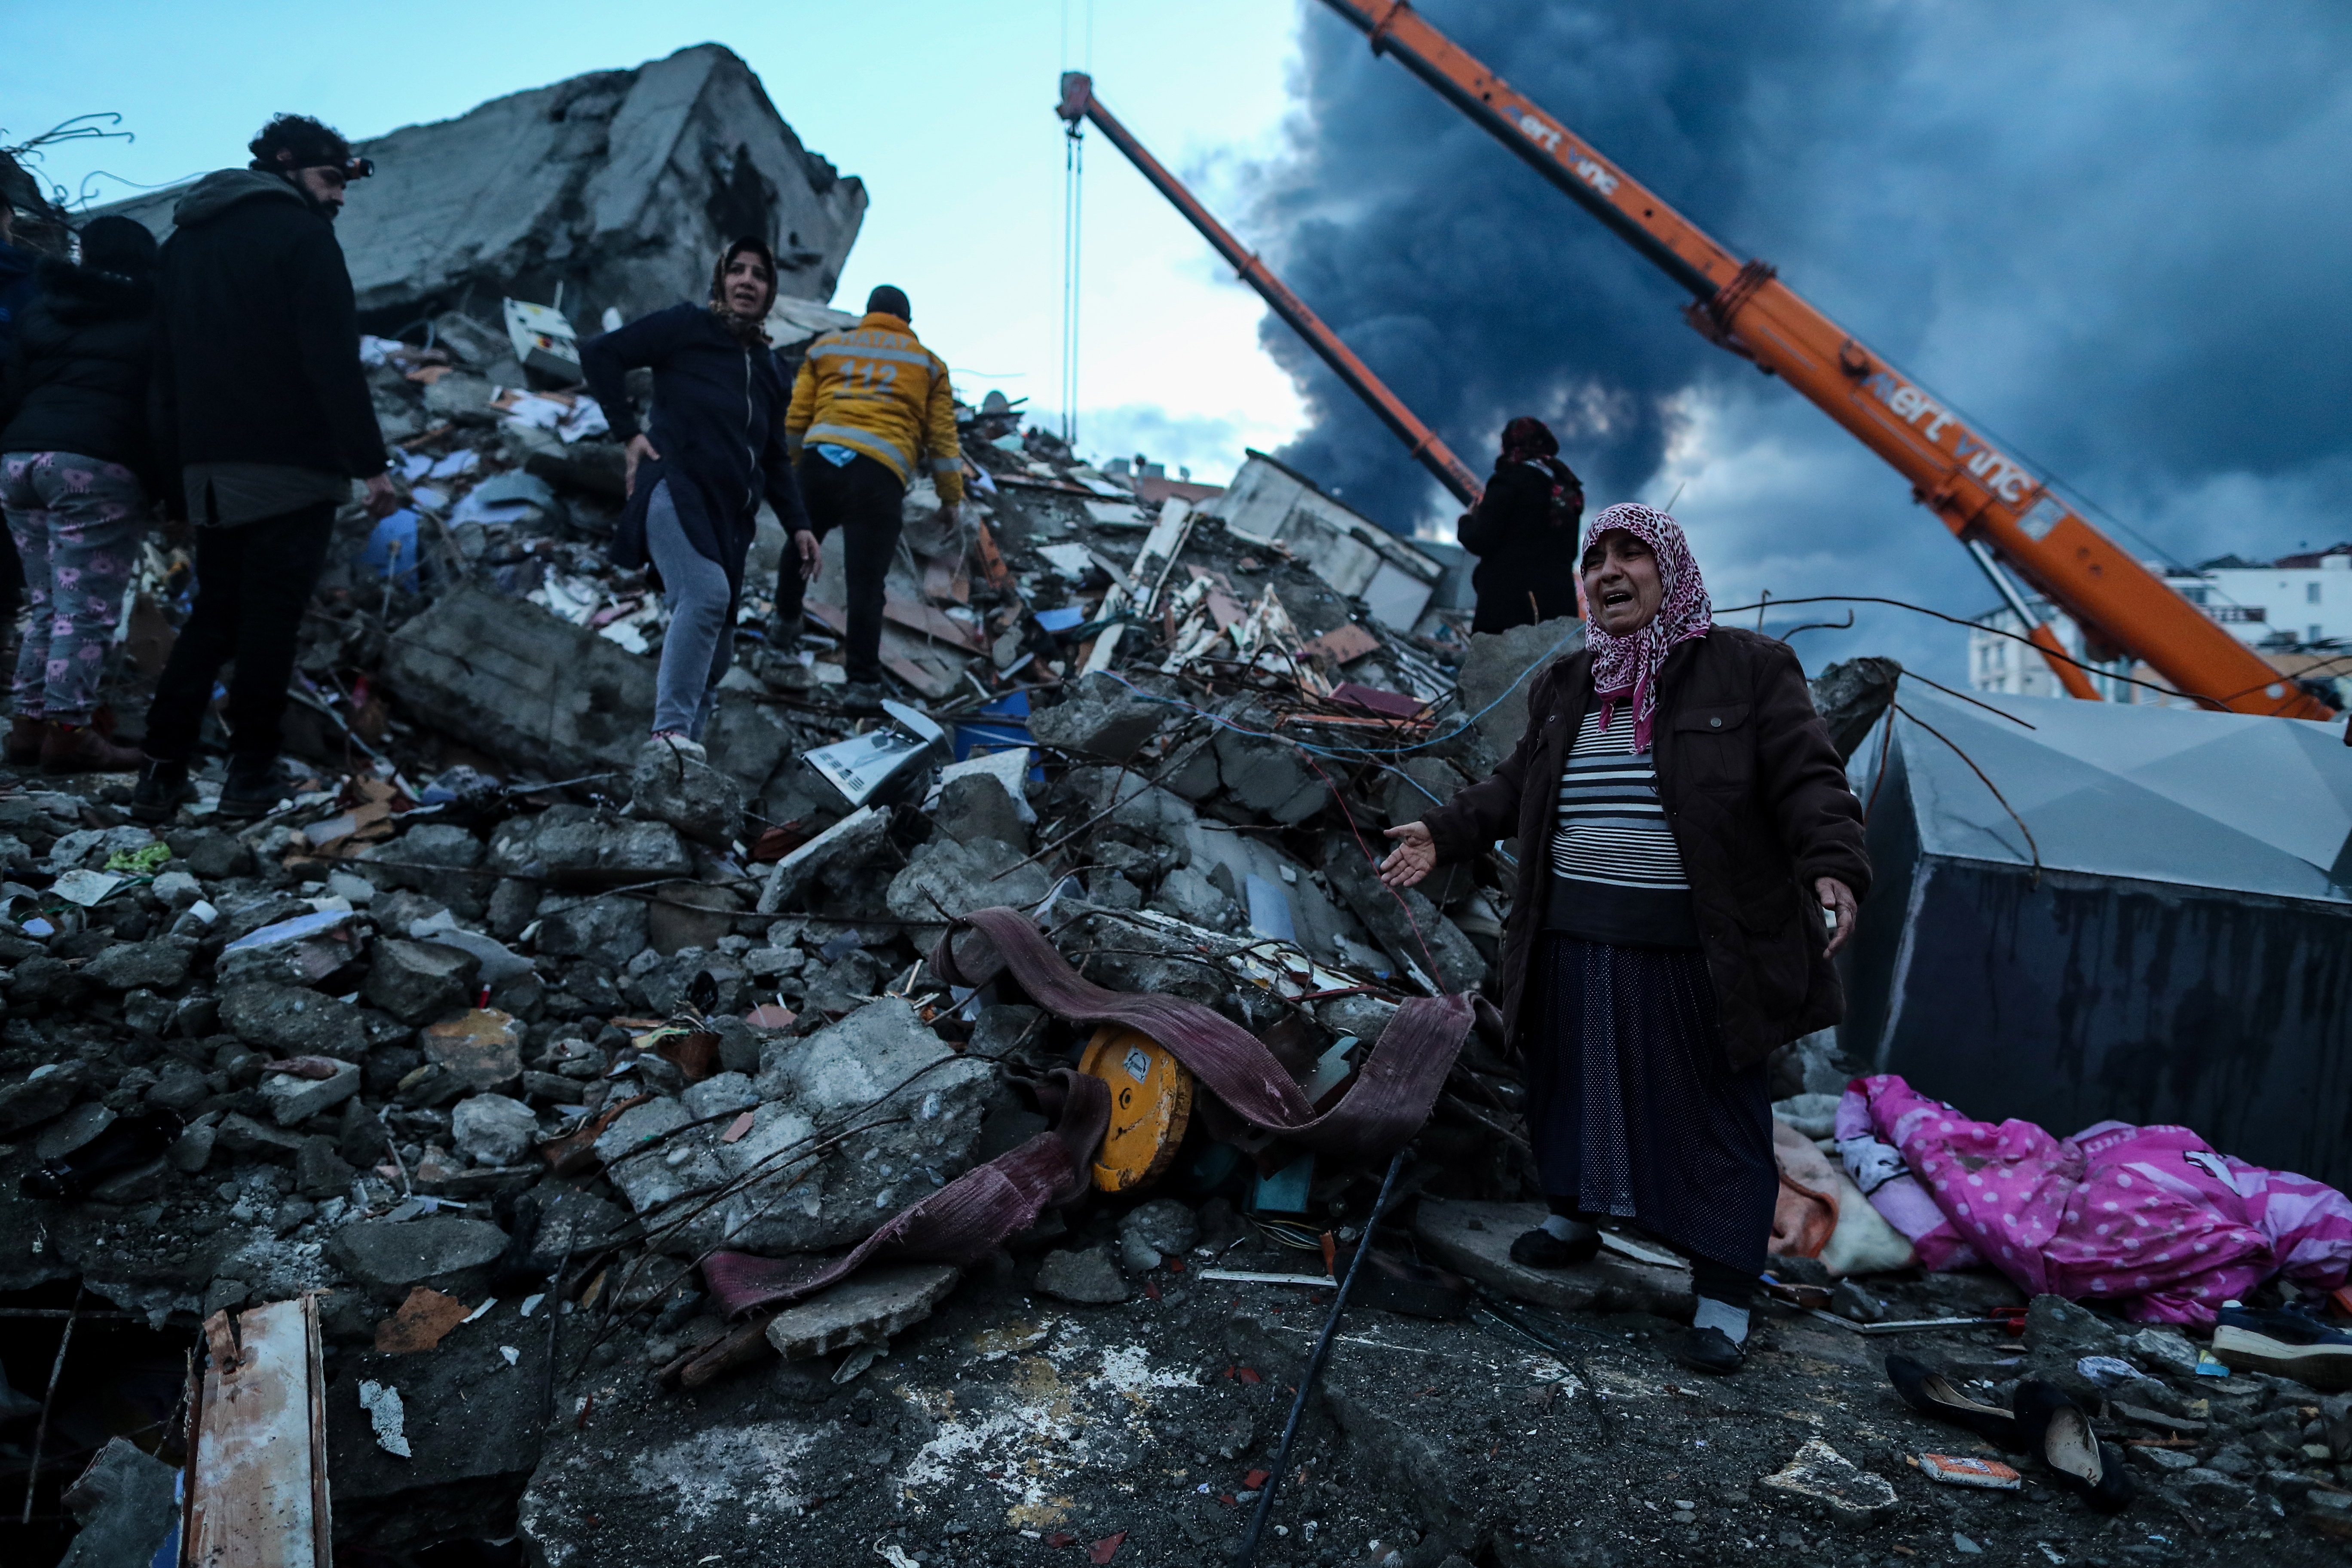 A woman reacts as emergency personnel carry out a search and rescue operation at the site of a collapsed building following an earthquake in Iskenderun, district of Hatay, Türkiye, Feb. 7, 2023. (EPA Photo)